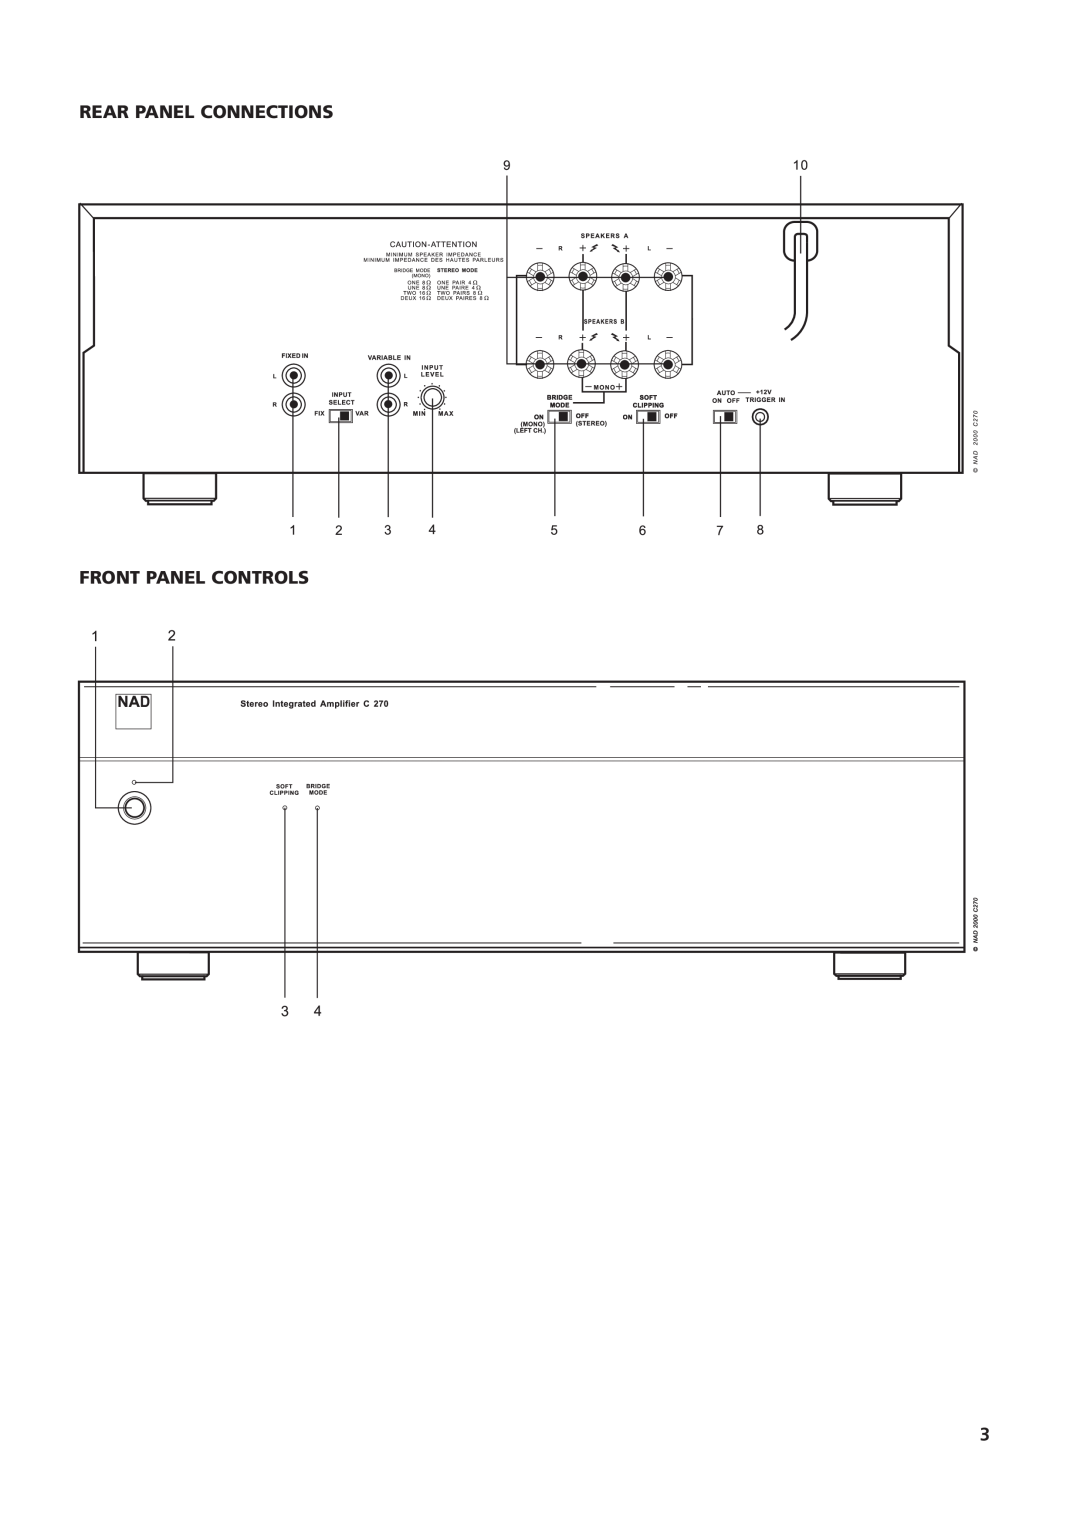 NAD C270 owner manual Rear Panel Connections Front Panel Controls 